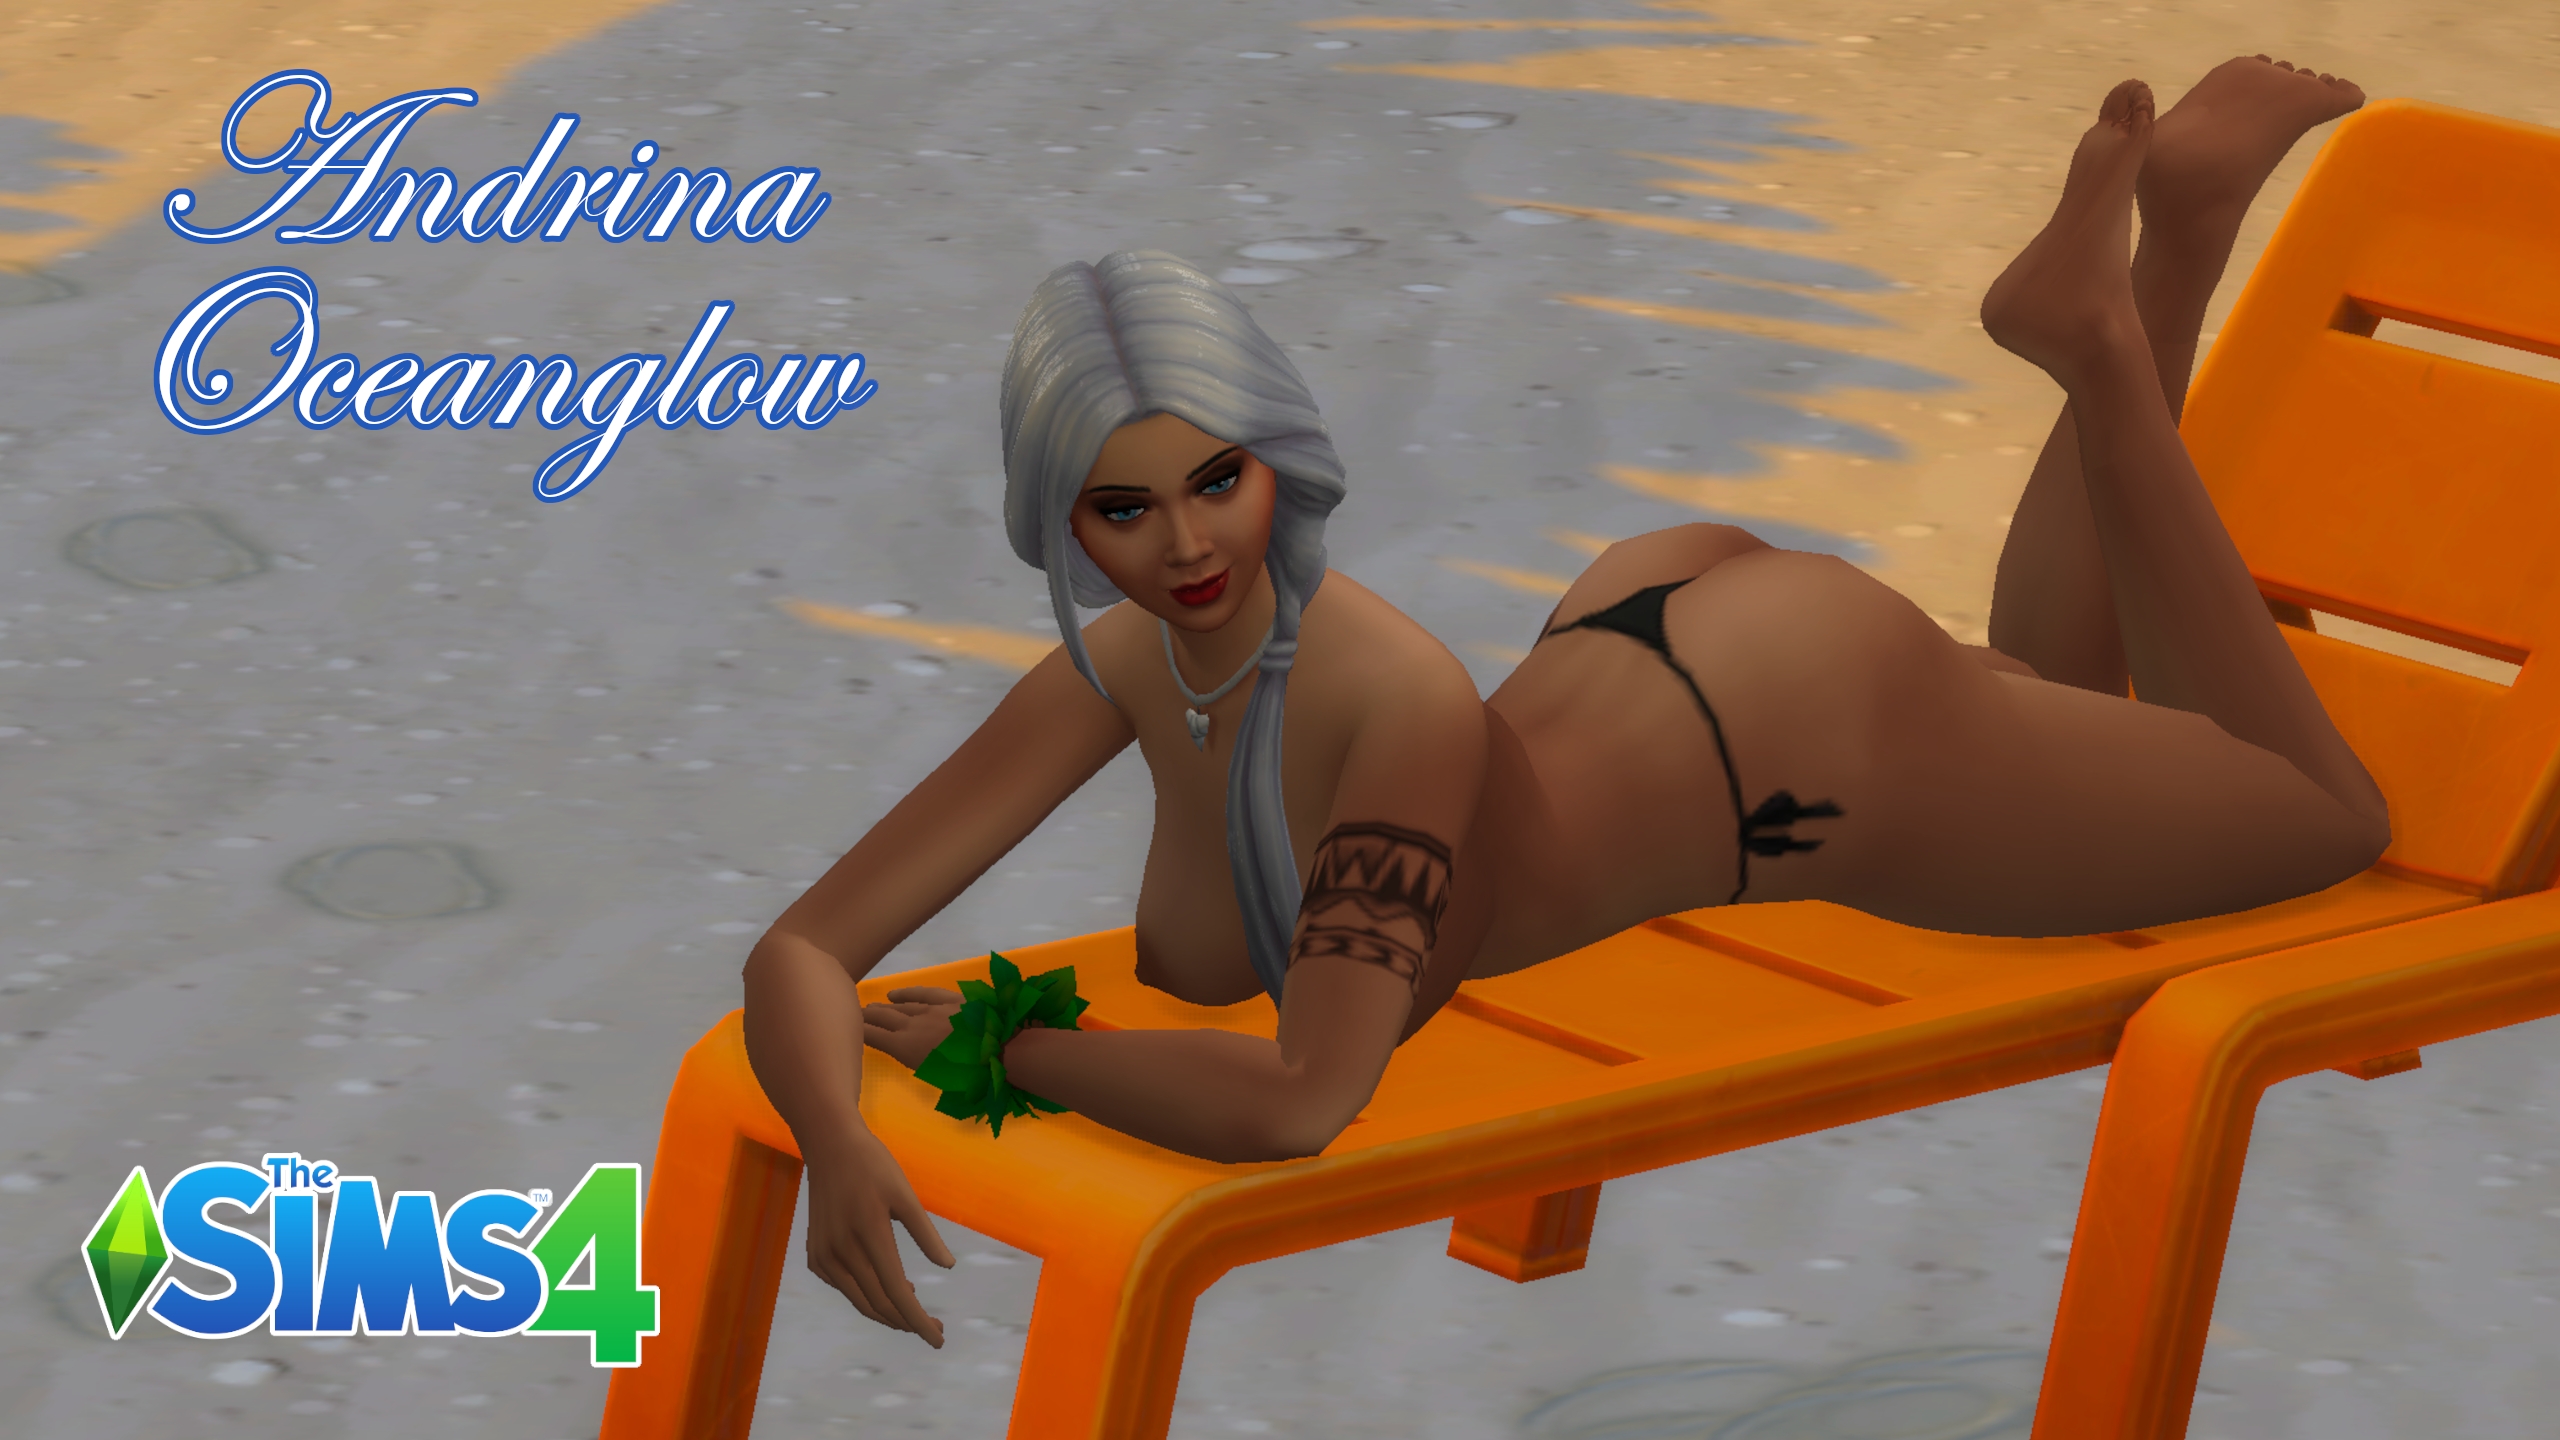 Sims 4 - Mermaid Andrina Oceanglow The Sims 4 Mermaid Siren White Hair Bustyfemale Thong Big Ass Toned Female Topless 9